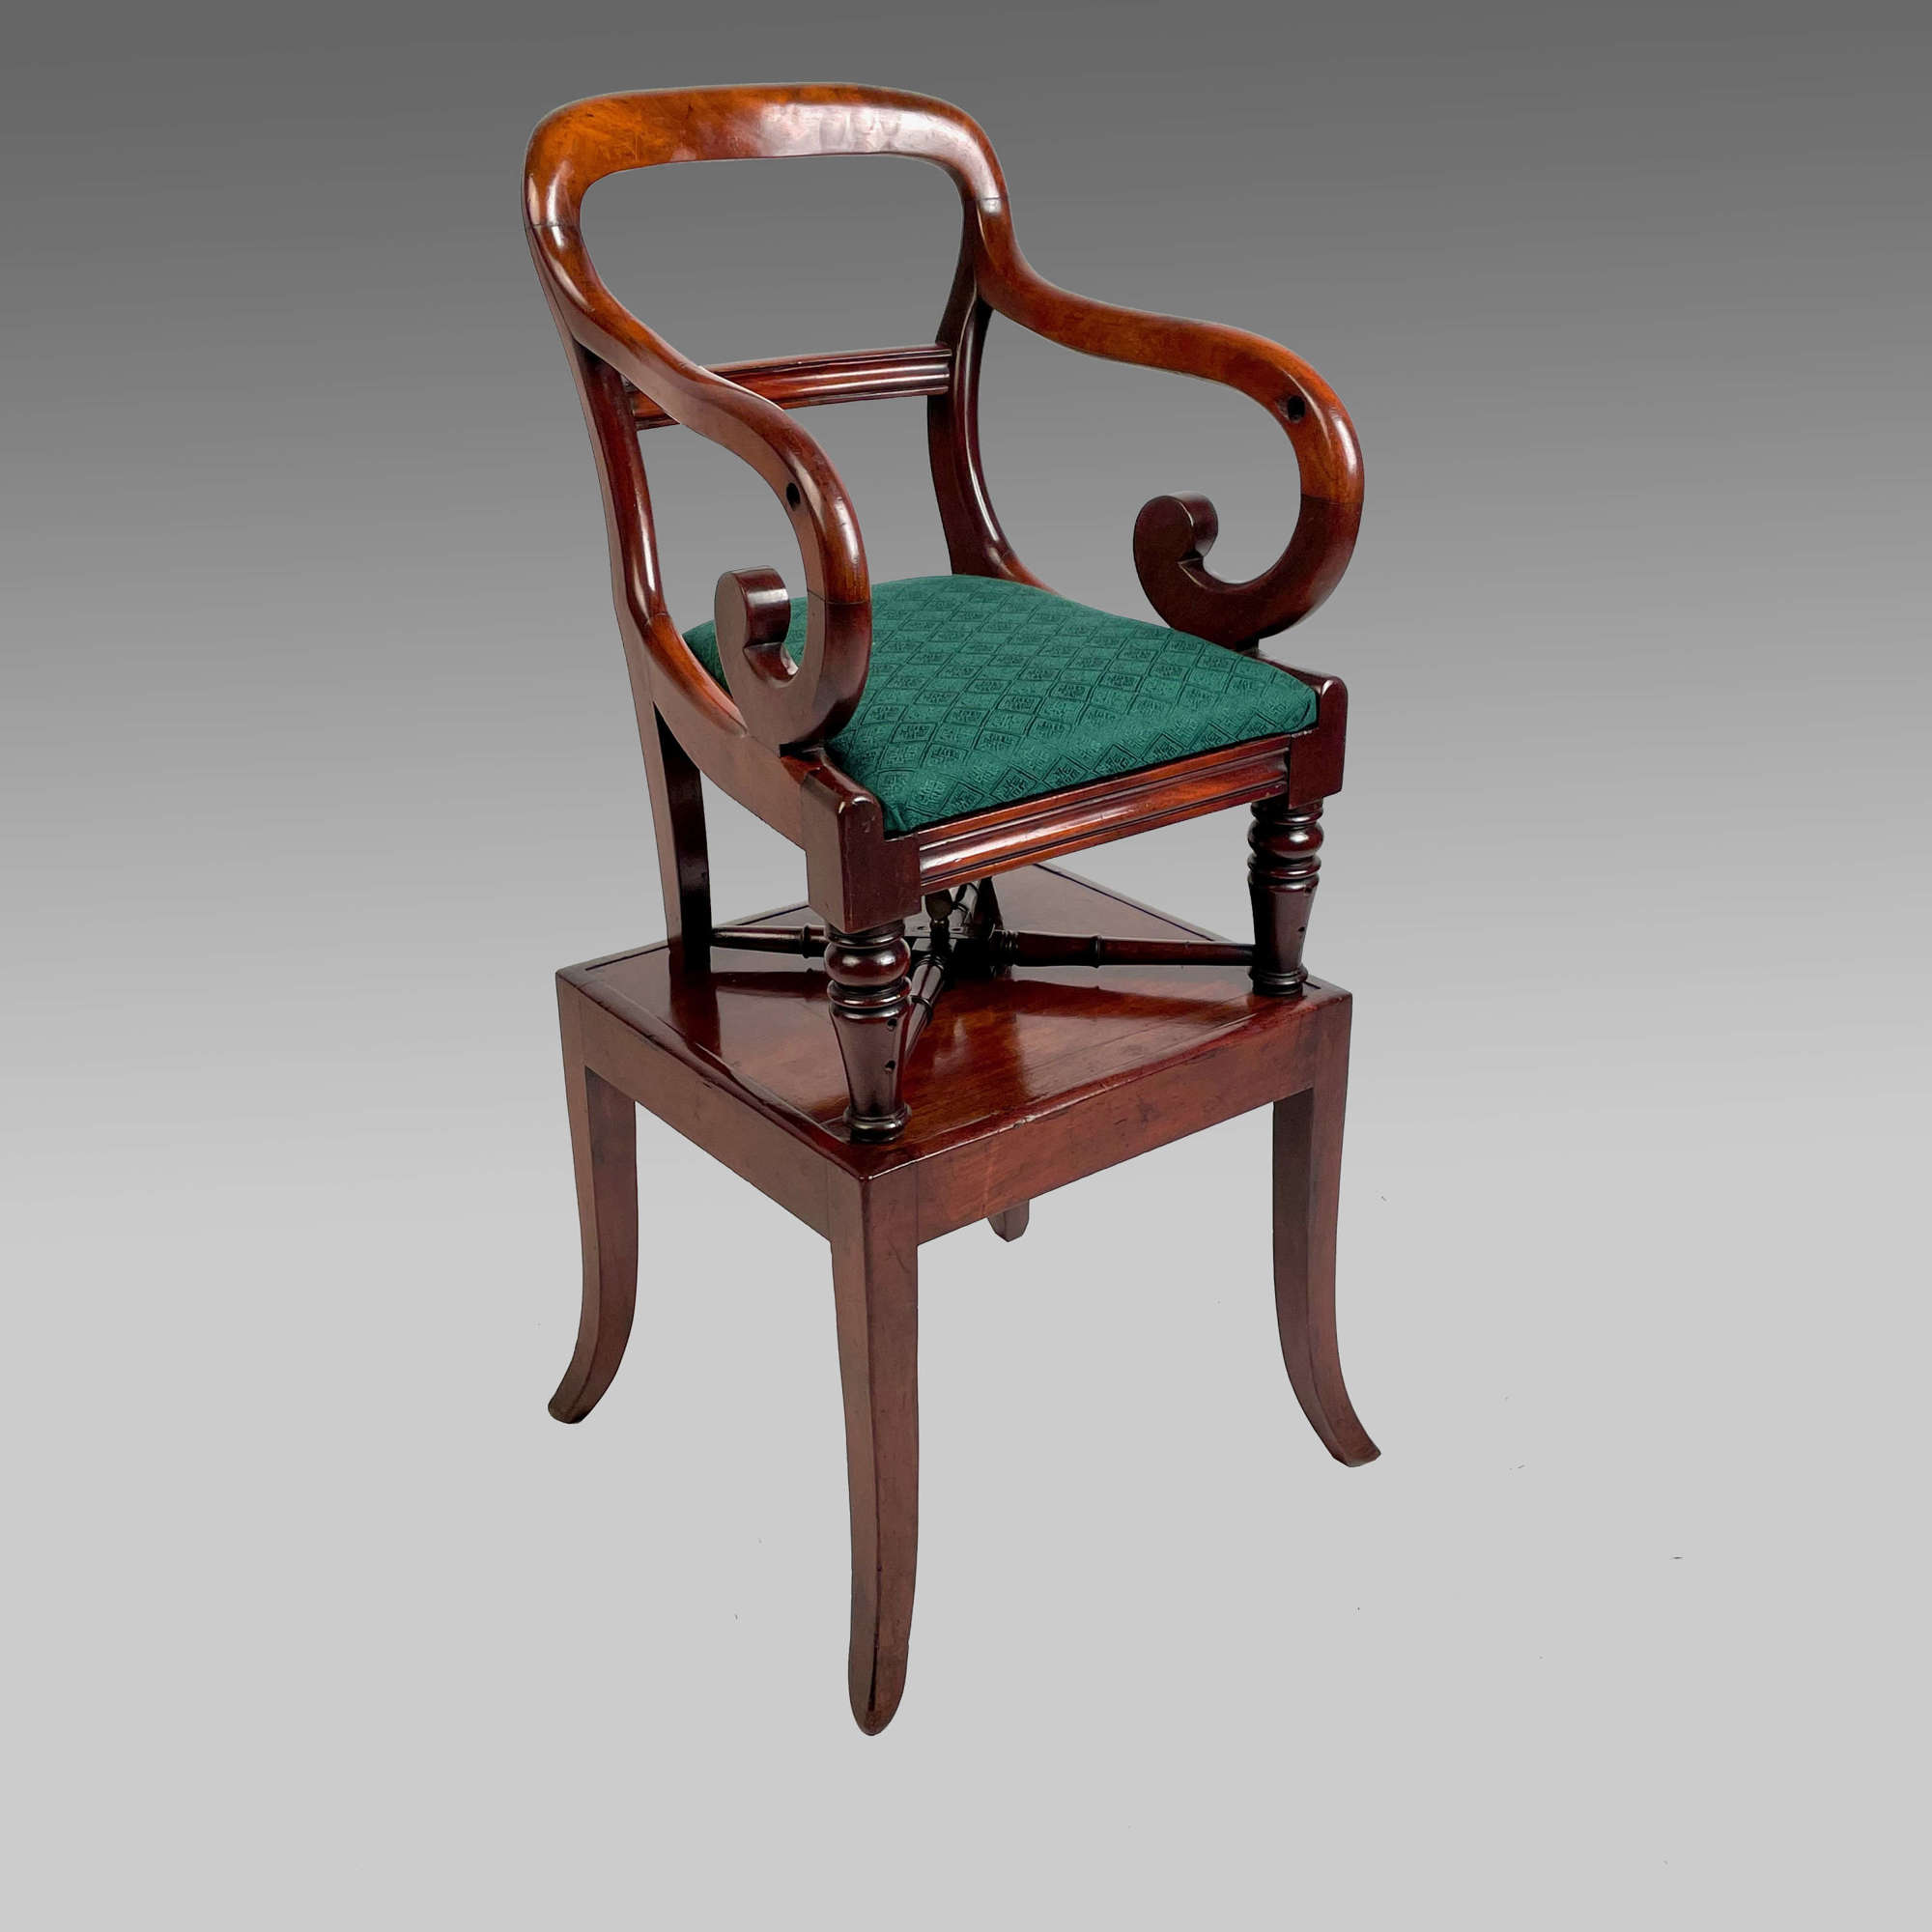 Regency mahogany child's chair on stand